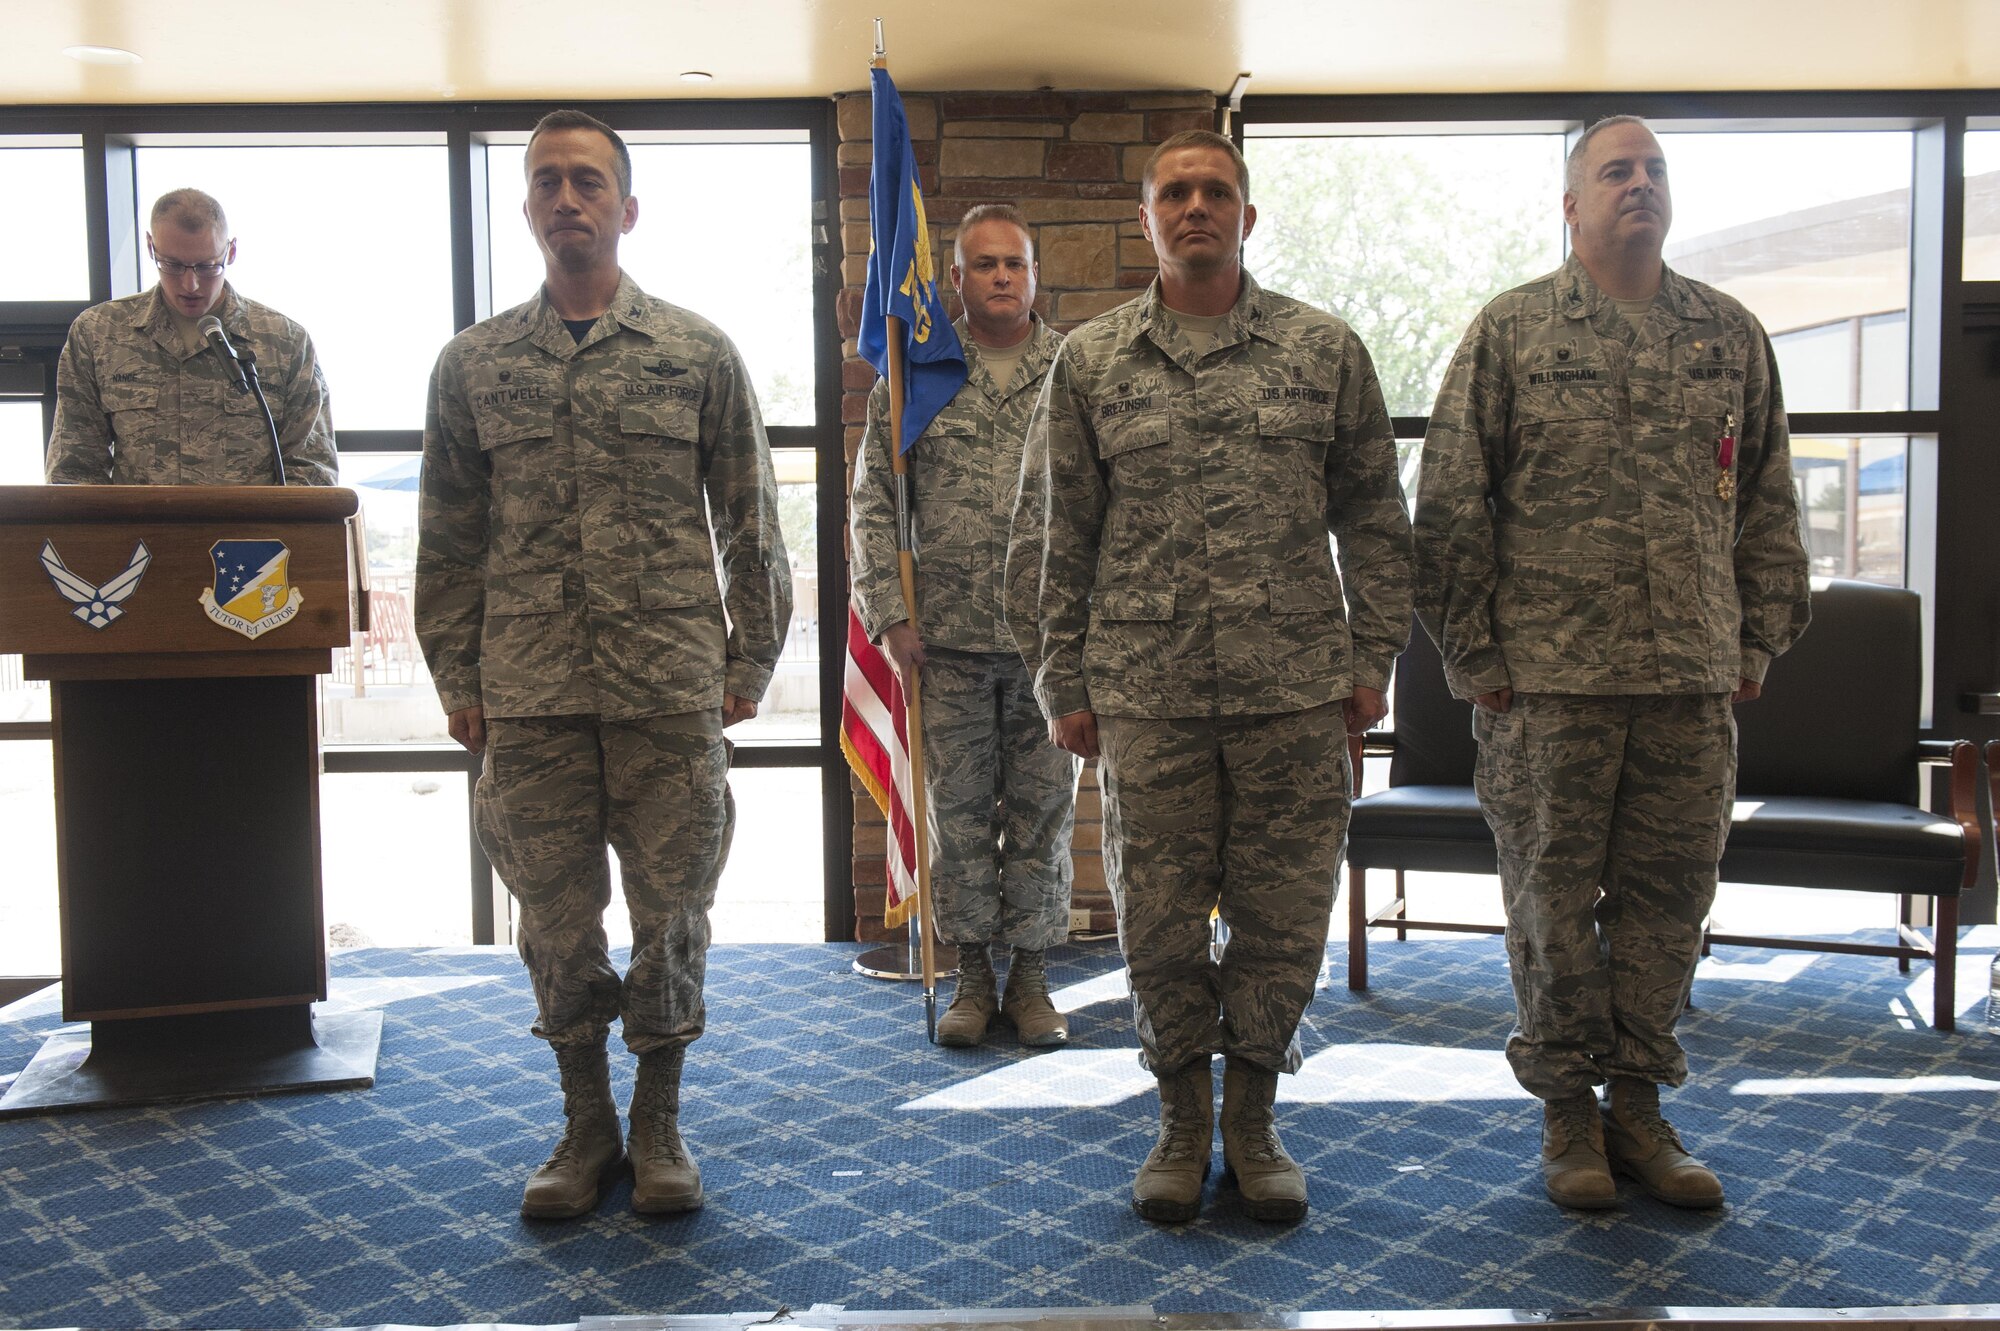 Col. Paul A. Willingham, 49th Medical Group outgoing commander, (right) relinquishes command of the 49th MDG to Col. Paul R. Brezinski (center) by the authority of Col. Houston R. Cantwell, 49th Wing commander (left) at Club Holloman, June 23, 2017. The change of command ceremony is rooted in military tradition and symbolizes the passing of command so all may witness the changing of leadership responsibilities. (U.S. Air Force photo by Airman 1st Class Ilyana A. Escalona)